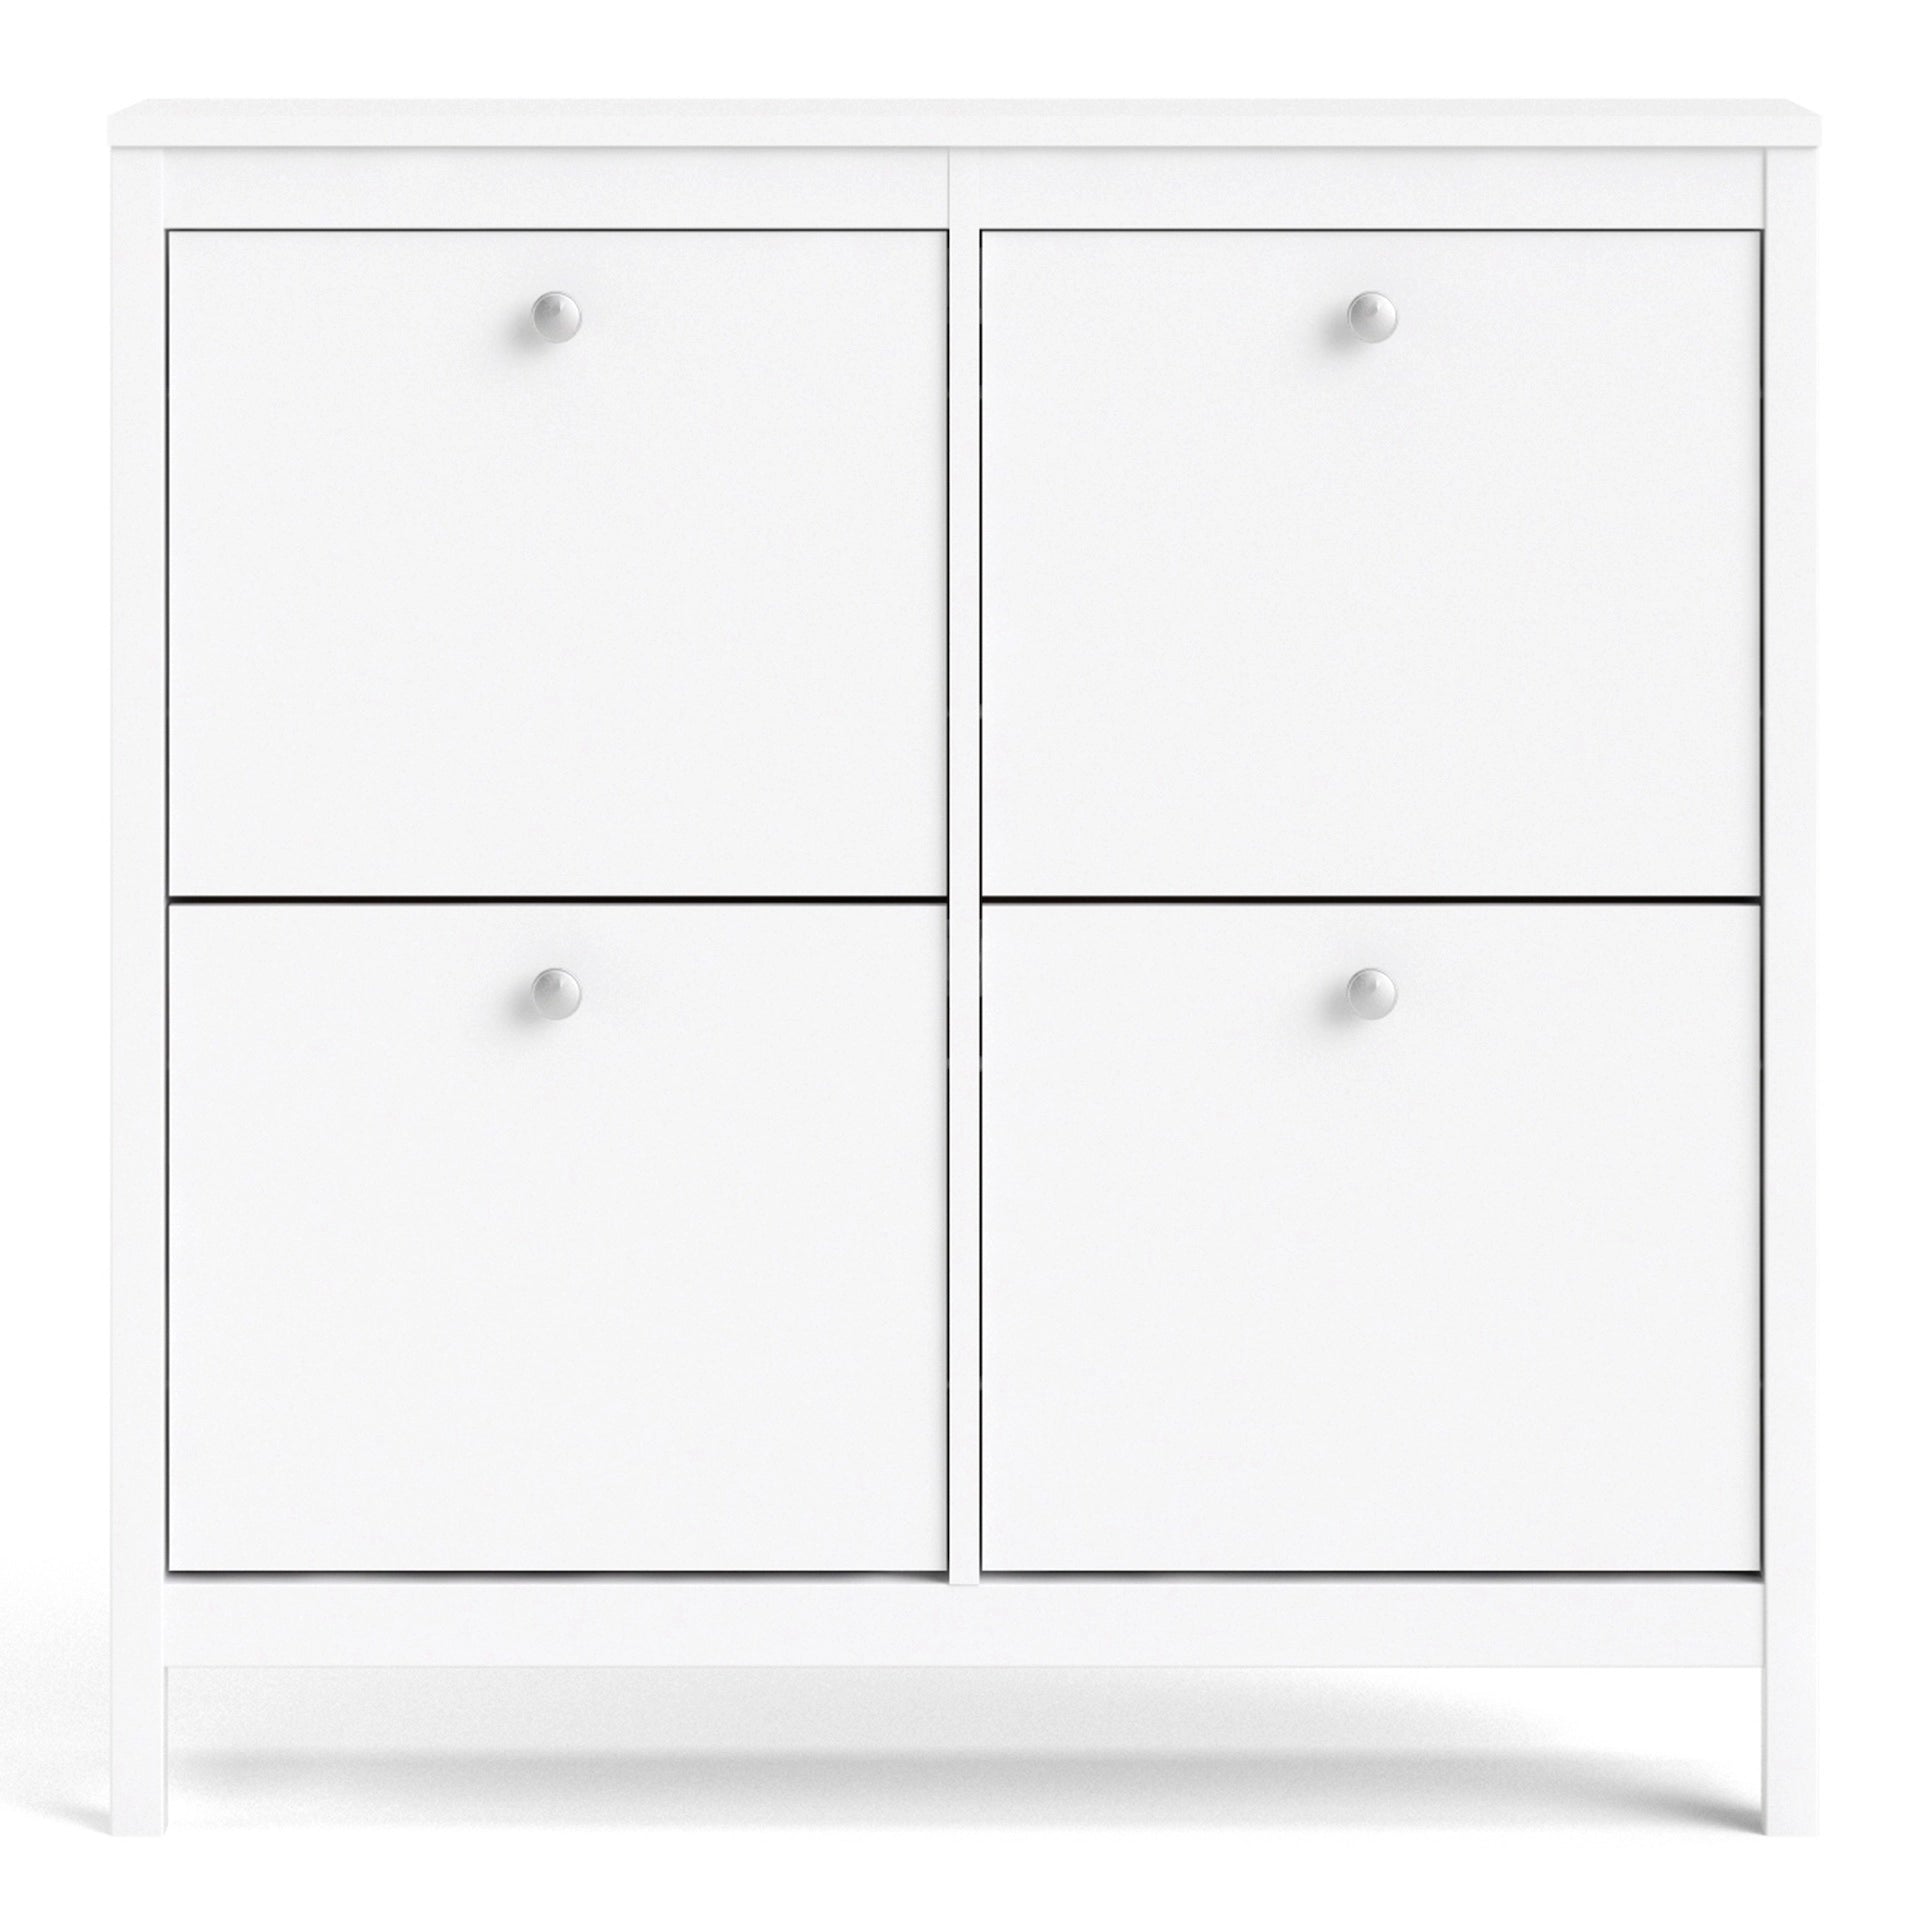 Furniture To Go Madrid Shoe Cabinet 4 Compartments in White